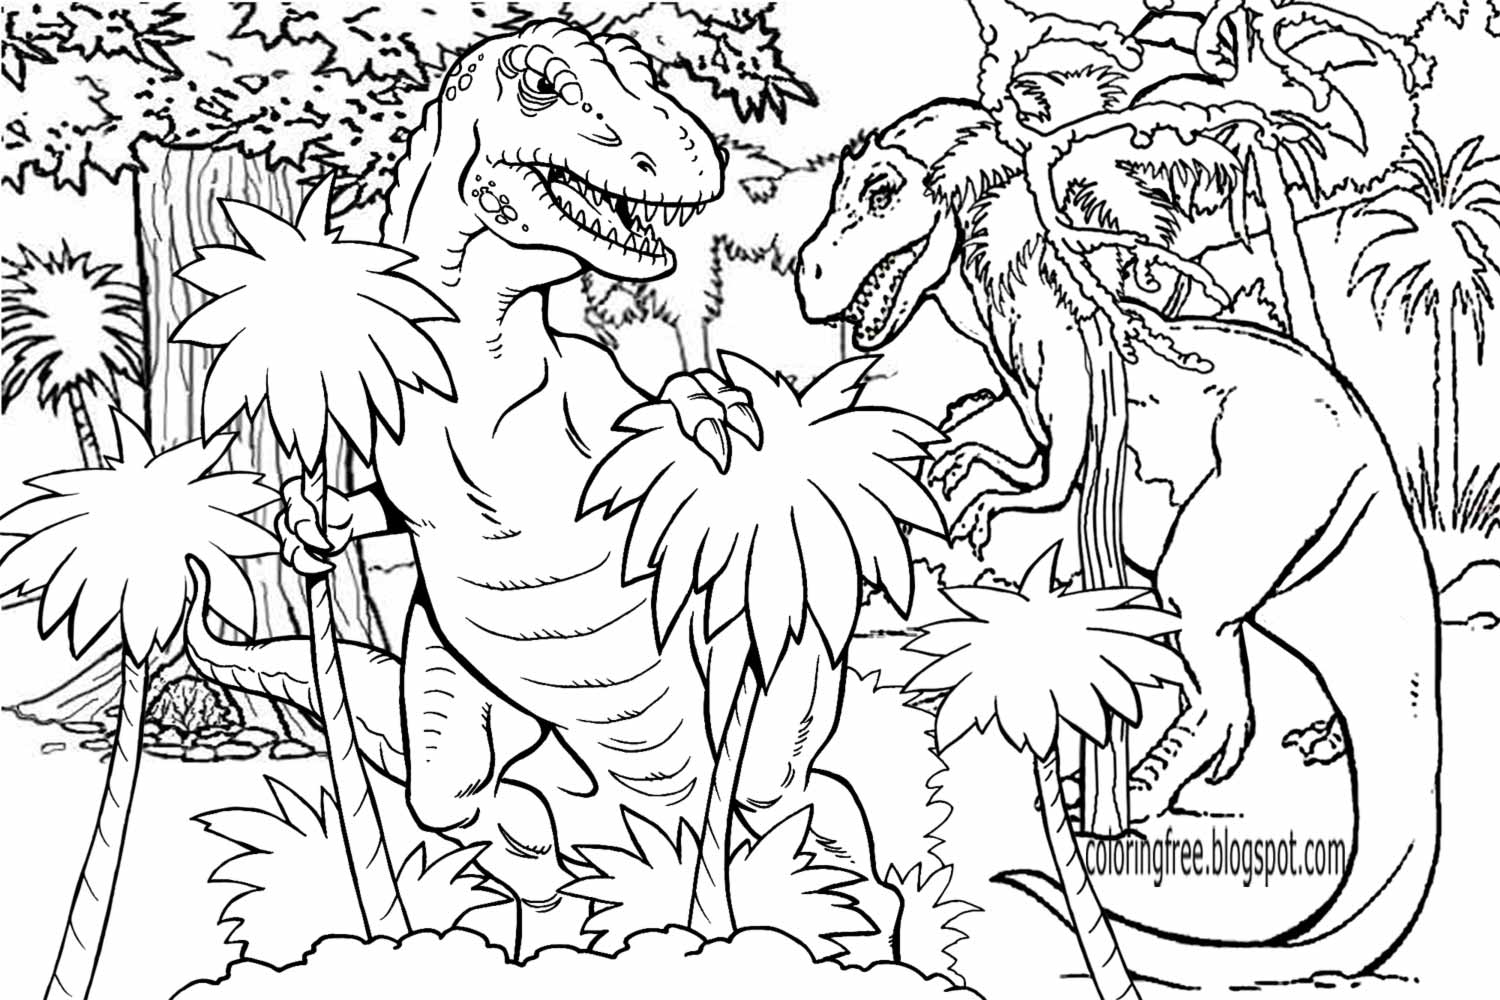 Download Free Coloring Pages Printable Pictures To Color Kids Drawing ideas: Prehistoric Jurassic World ...